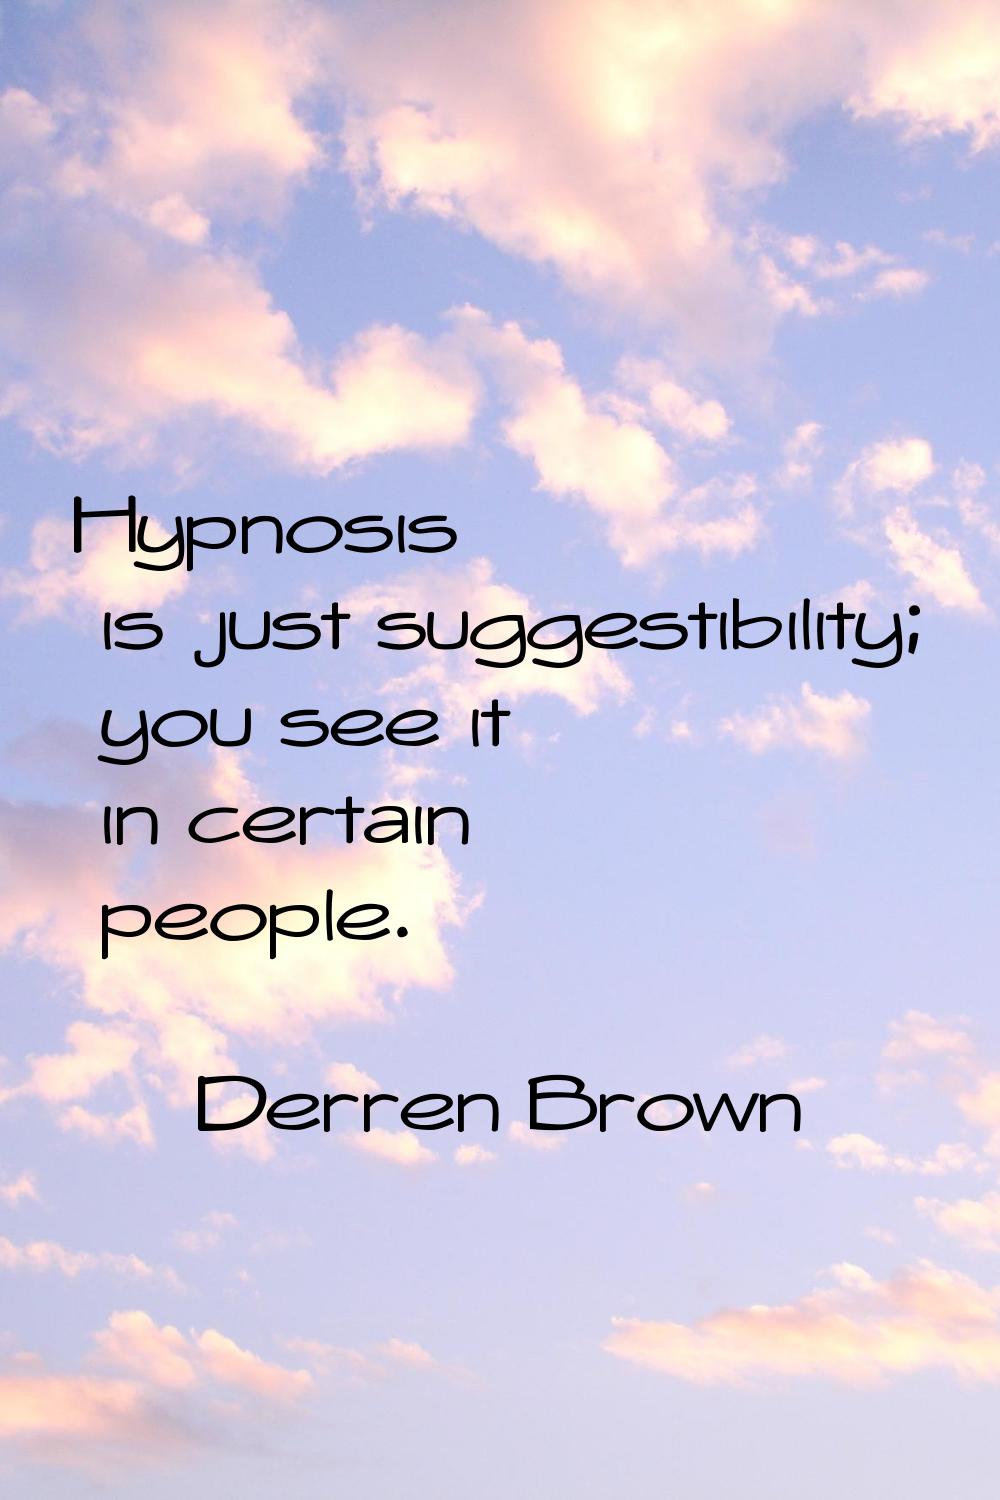 Hypnosis is just suggestibility; you see it in certain people.